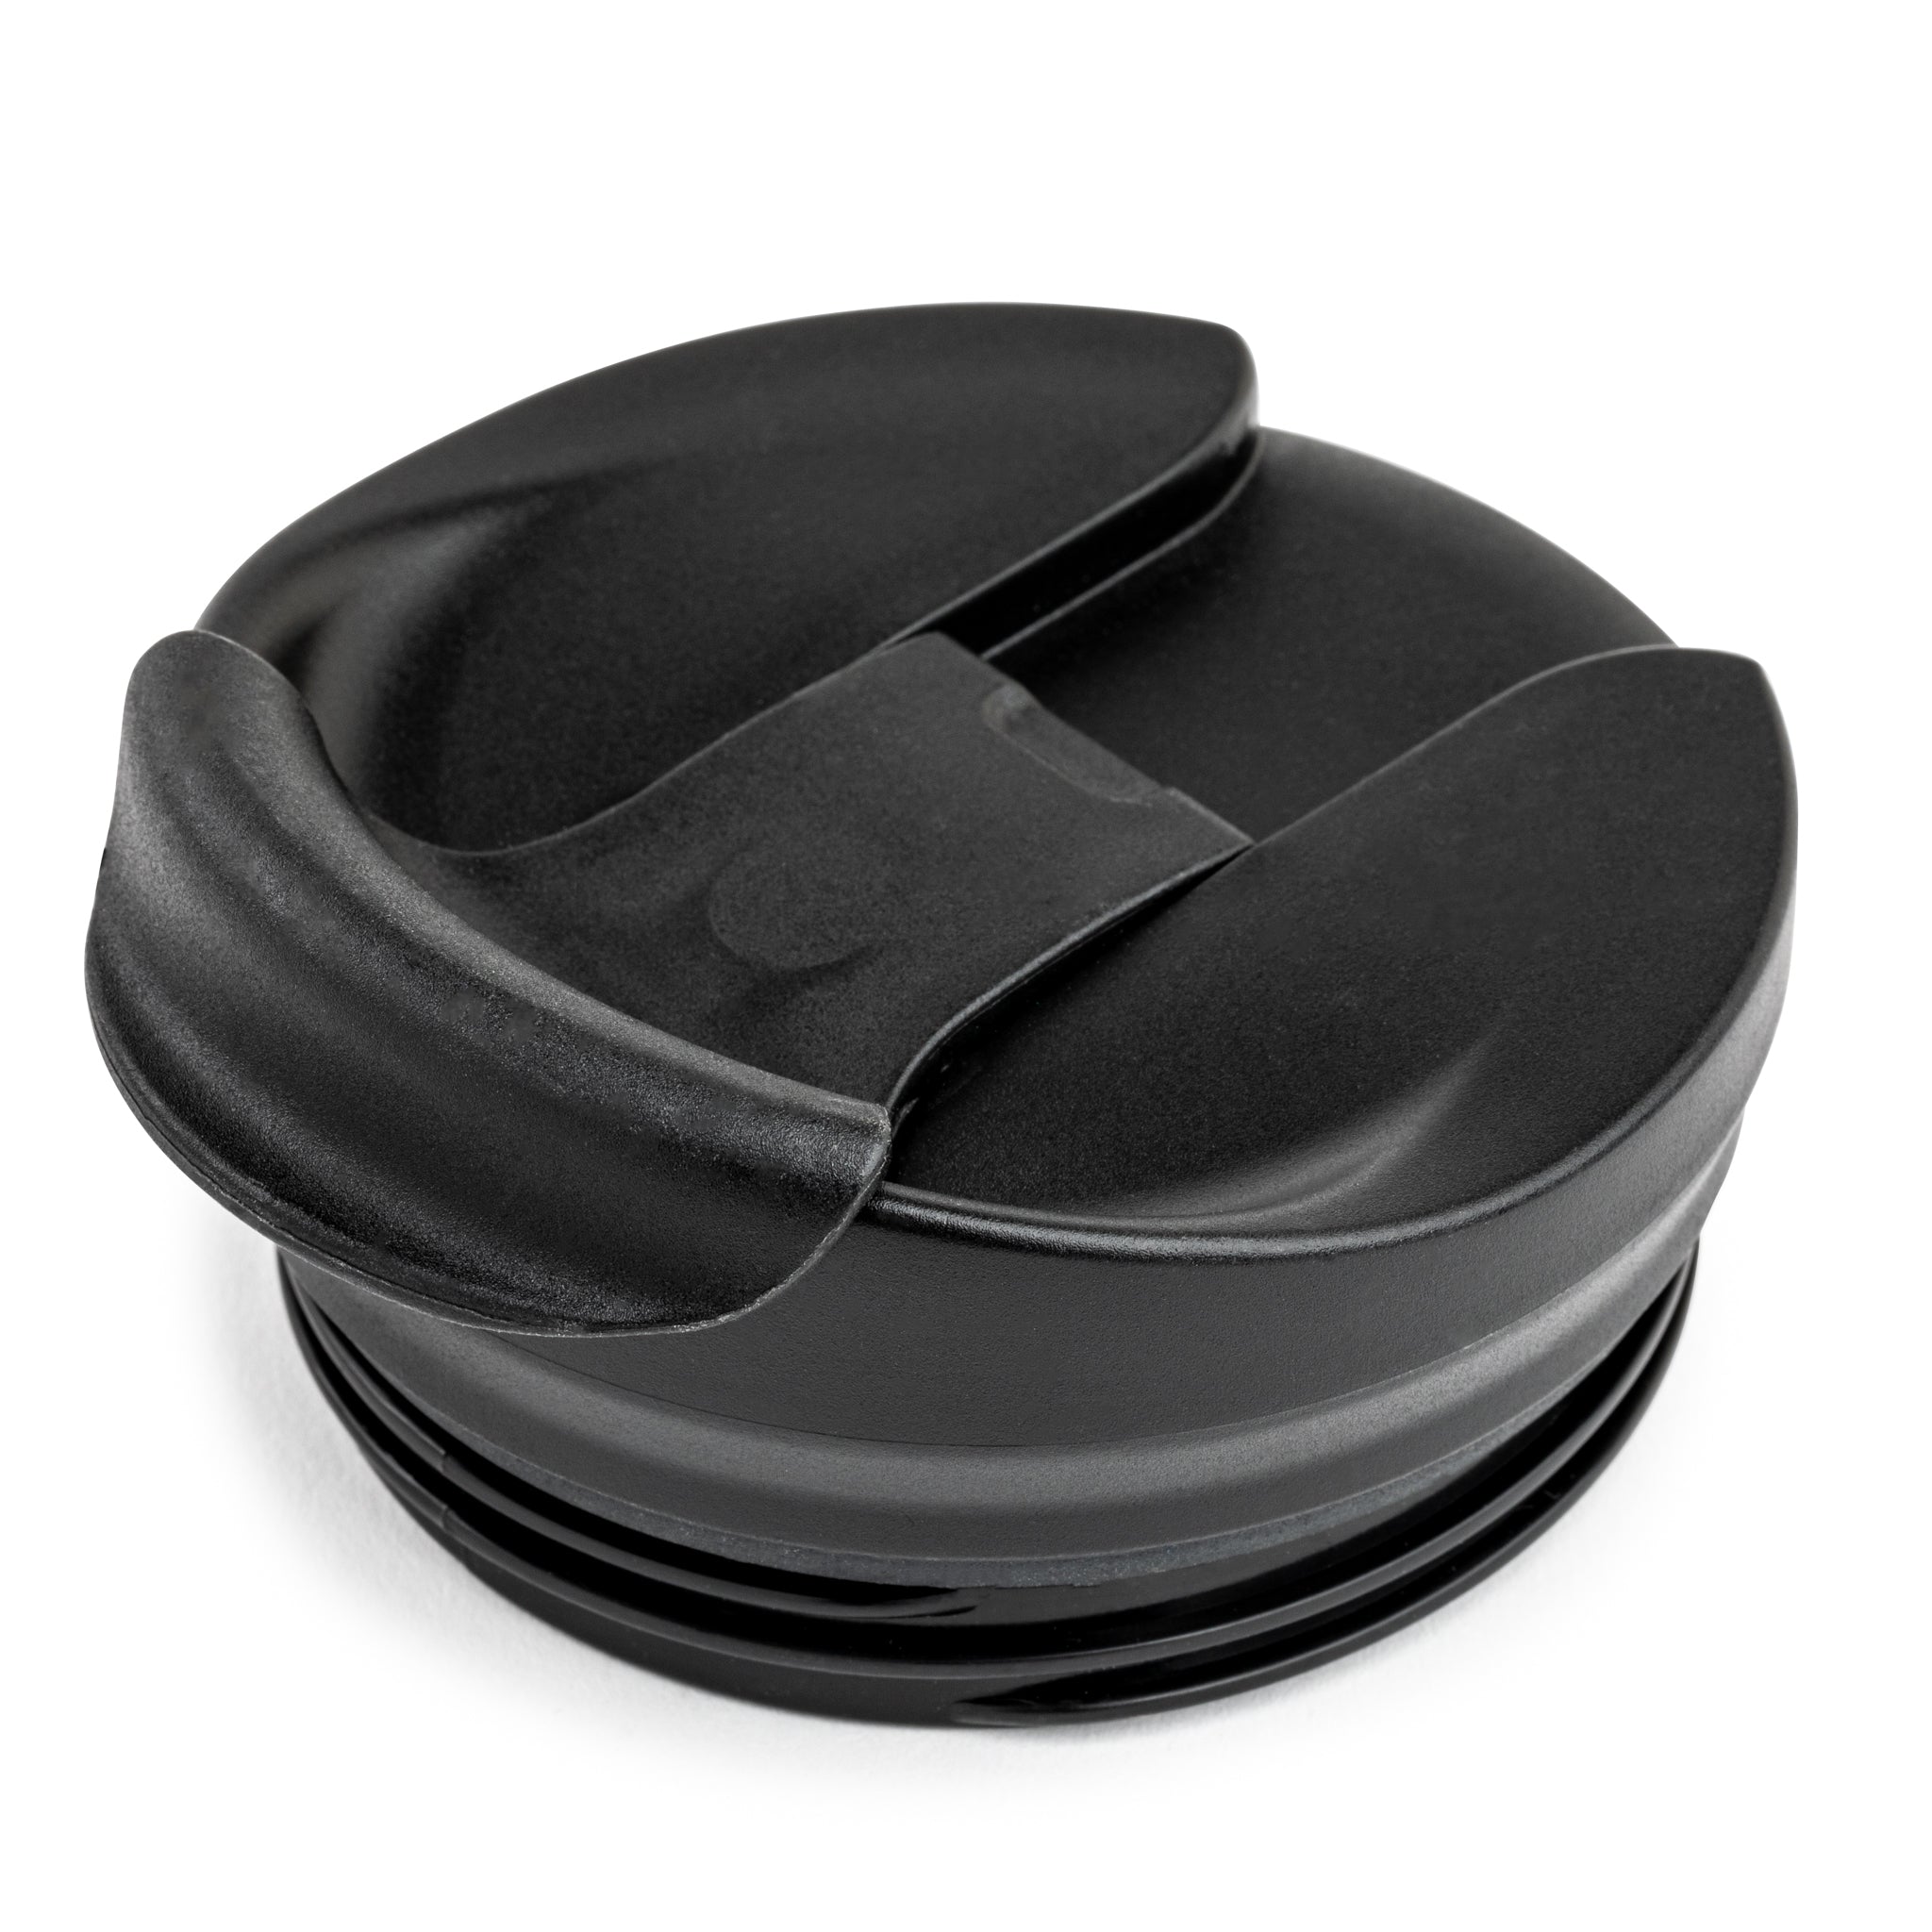 Spill Proof Lid Replacement, Mugs Cups Lid Replacement